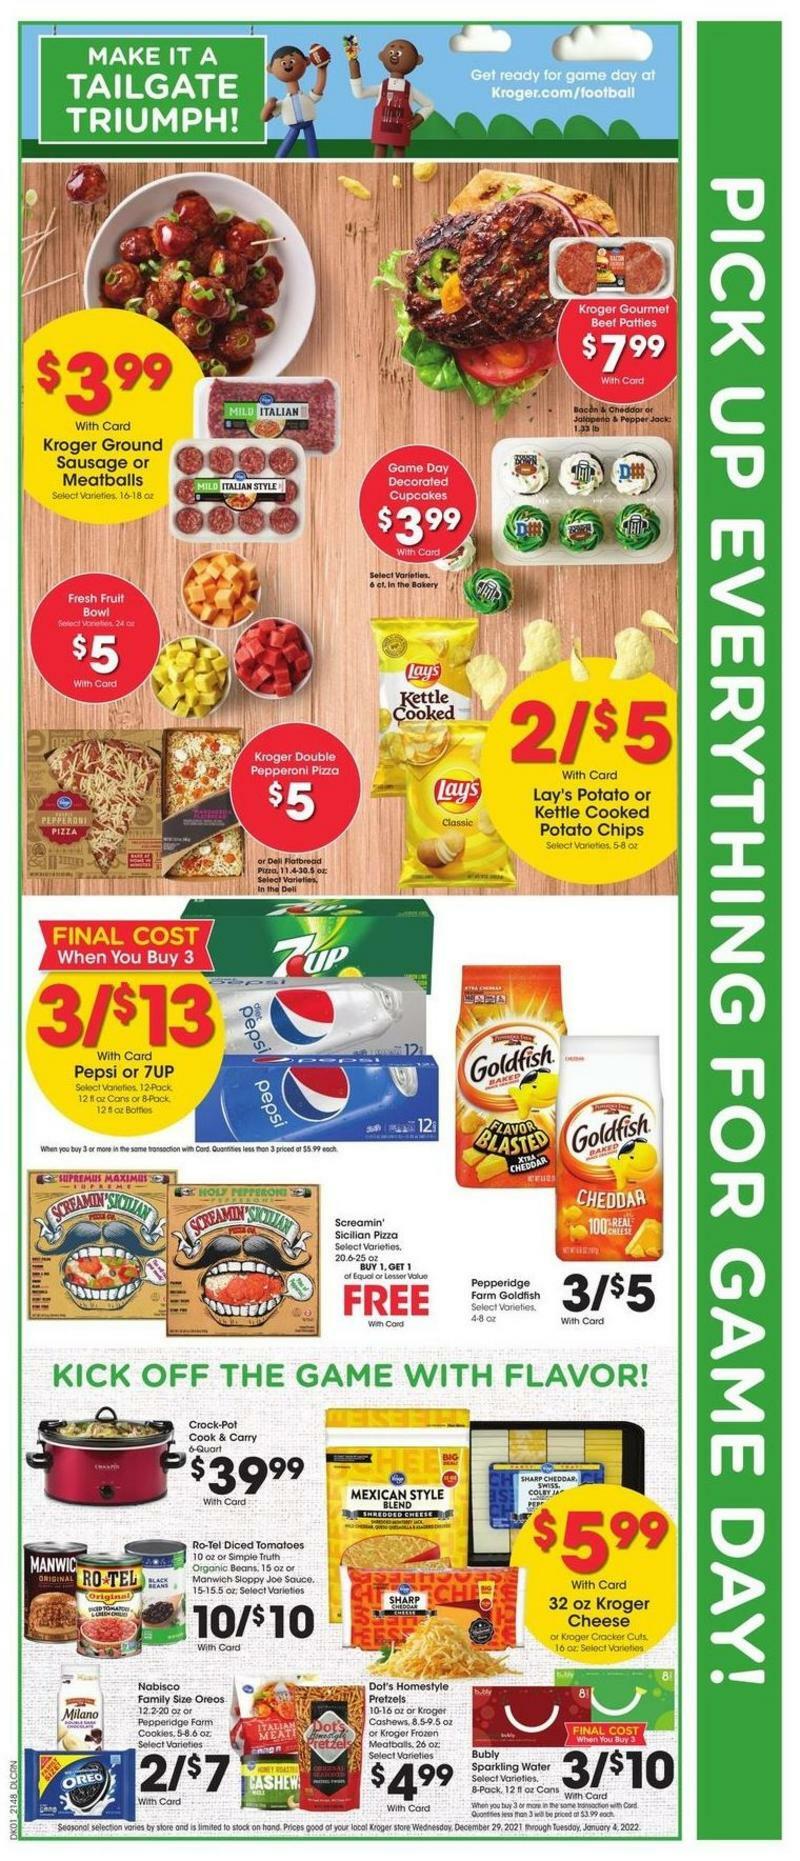 Kroger Weekly Ad from December 29